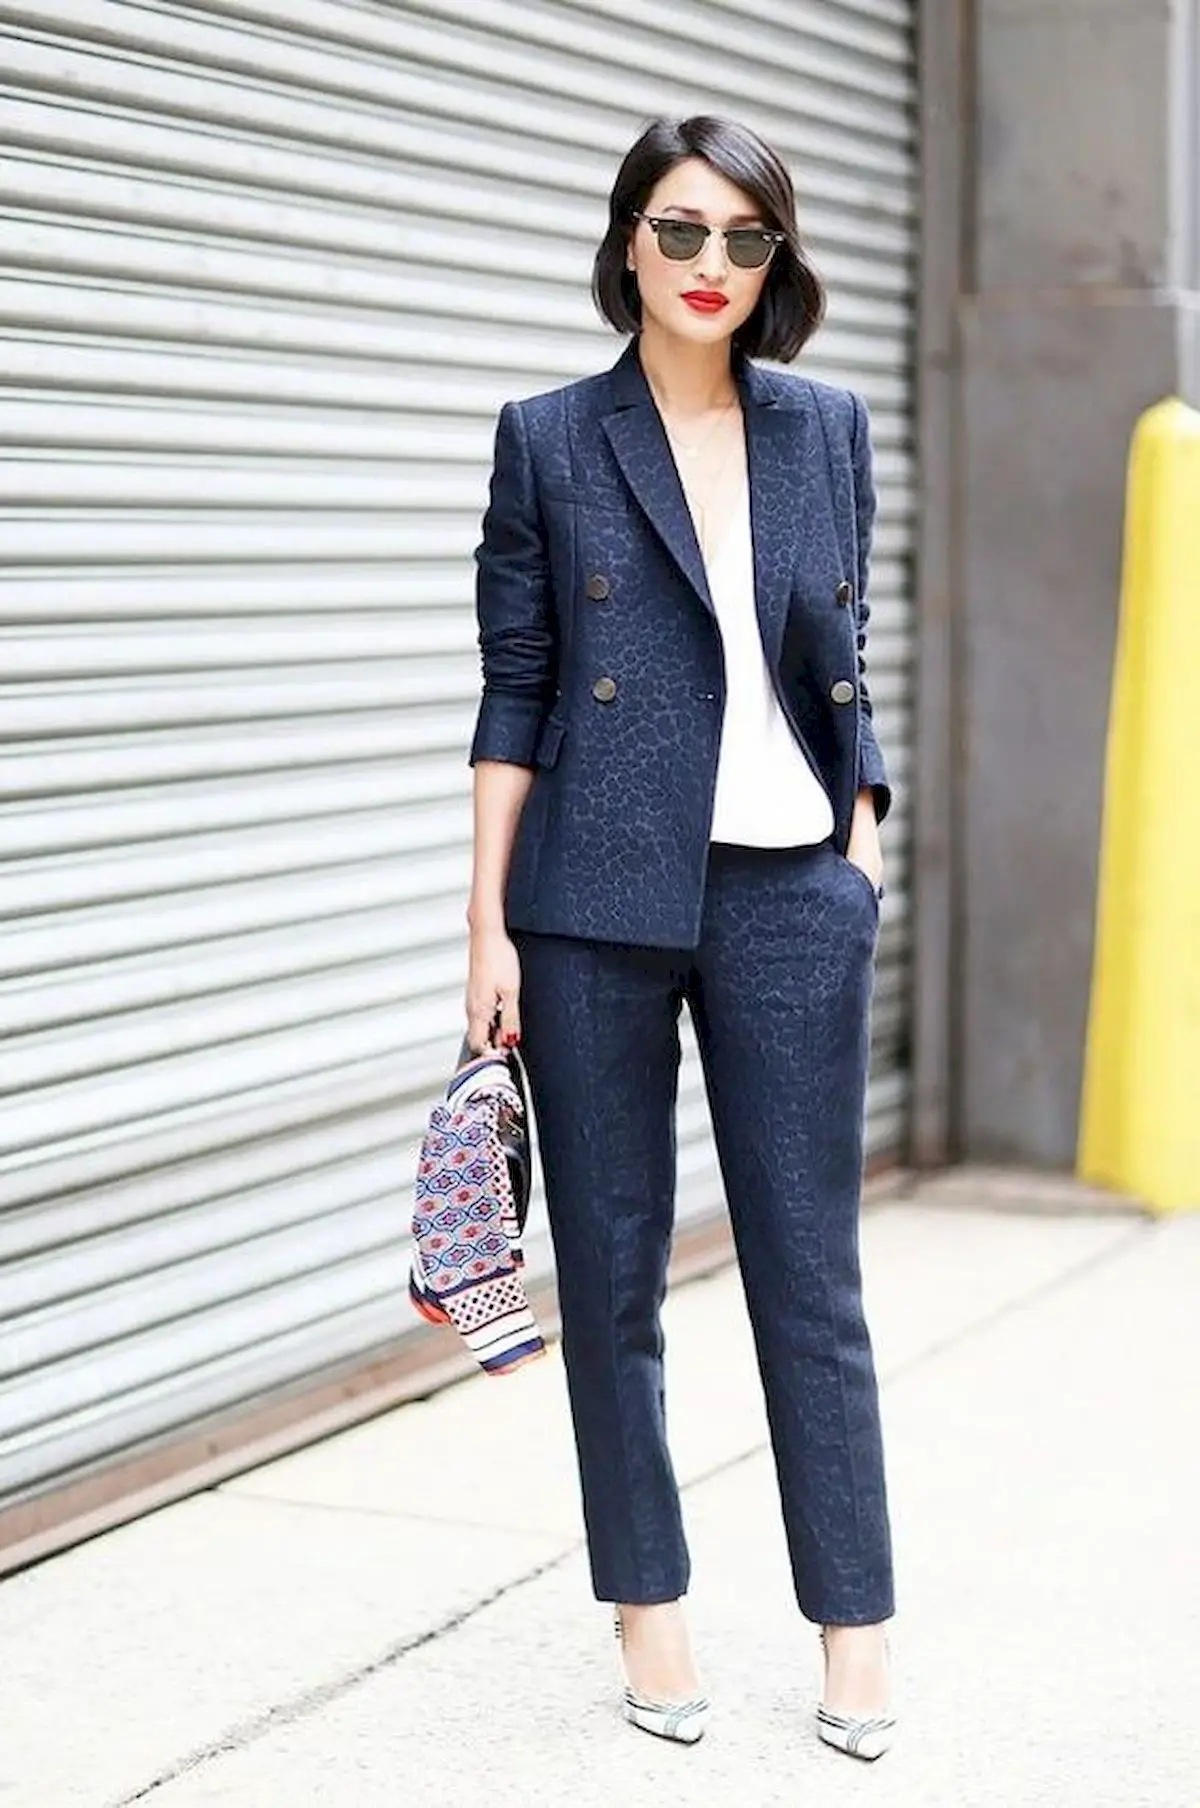 50 Genius Job Interview Outfit Ideas for Women (38 ...